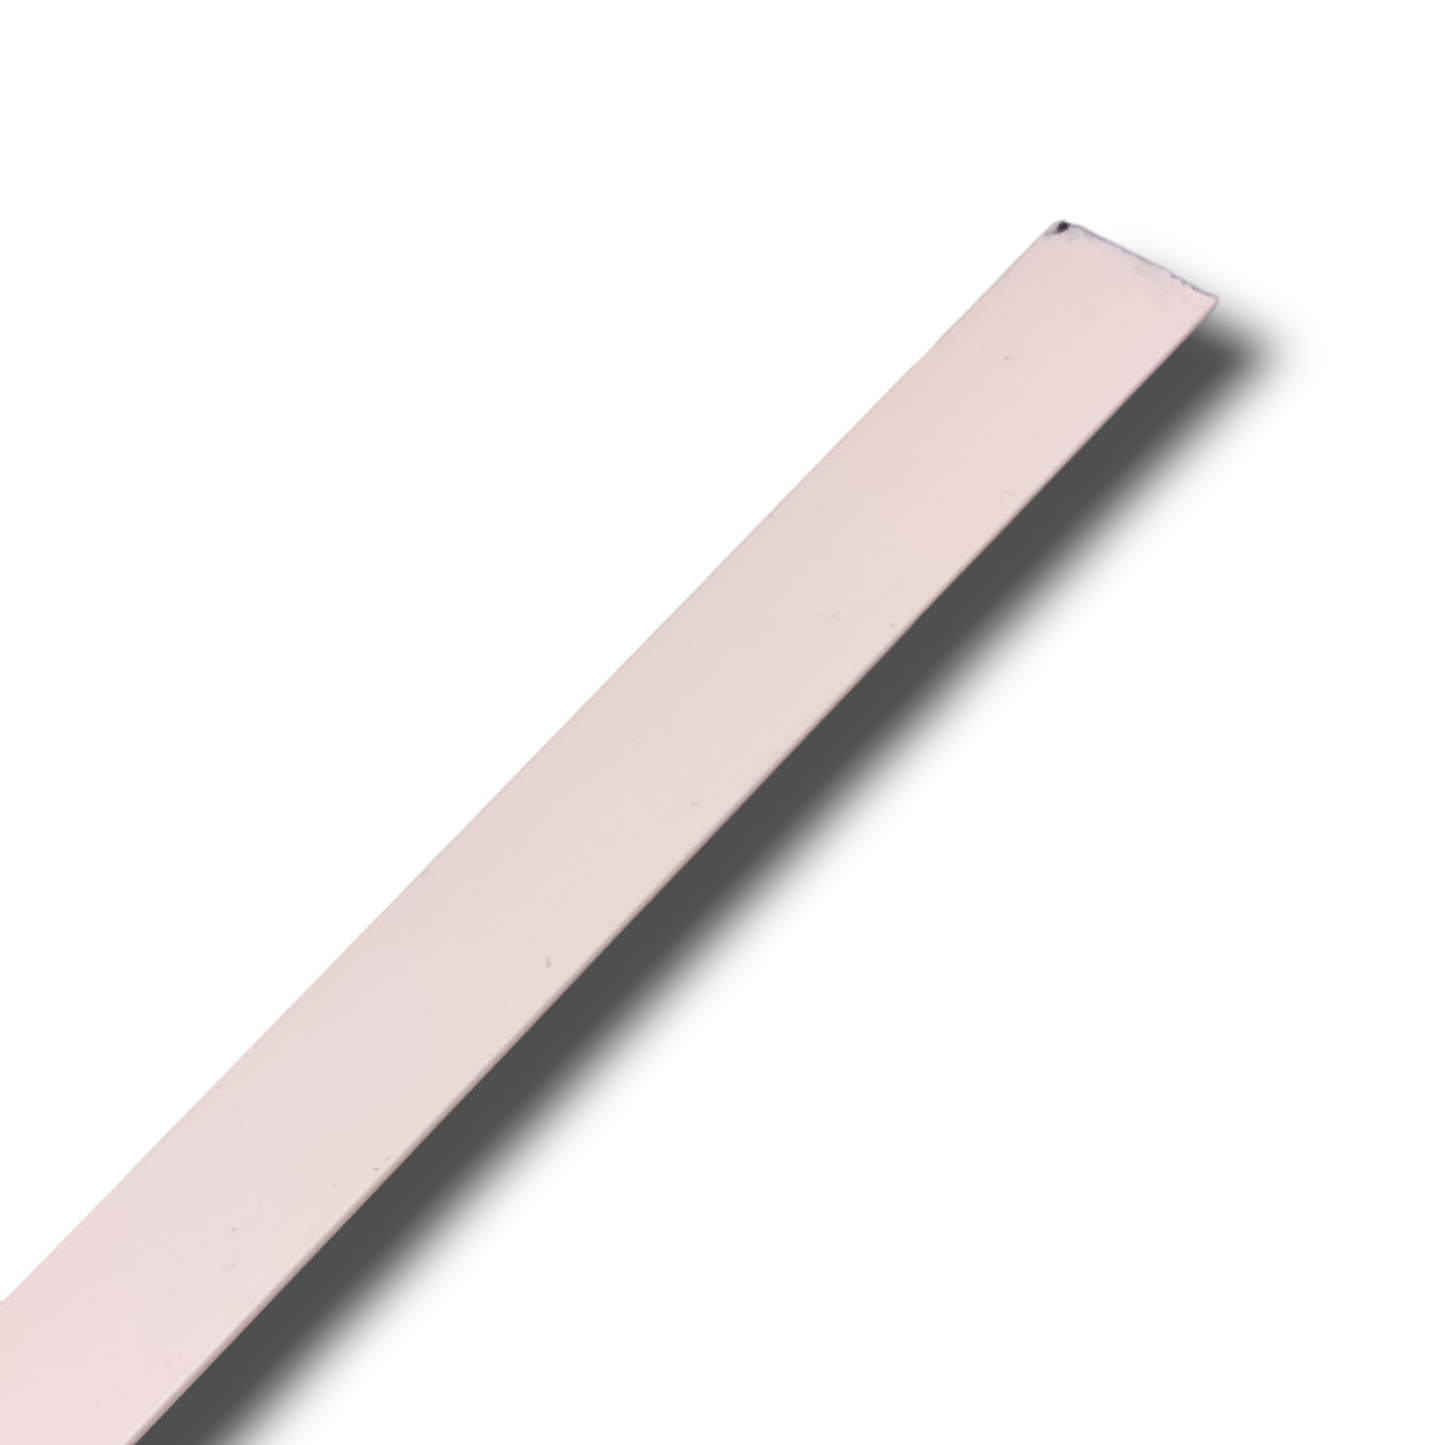 Splint by the meter in coated steel, 15 x 0,50 mm - pink color, for corsetry, orthopedics and wedding dresses